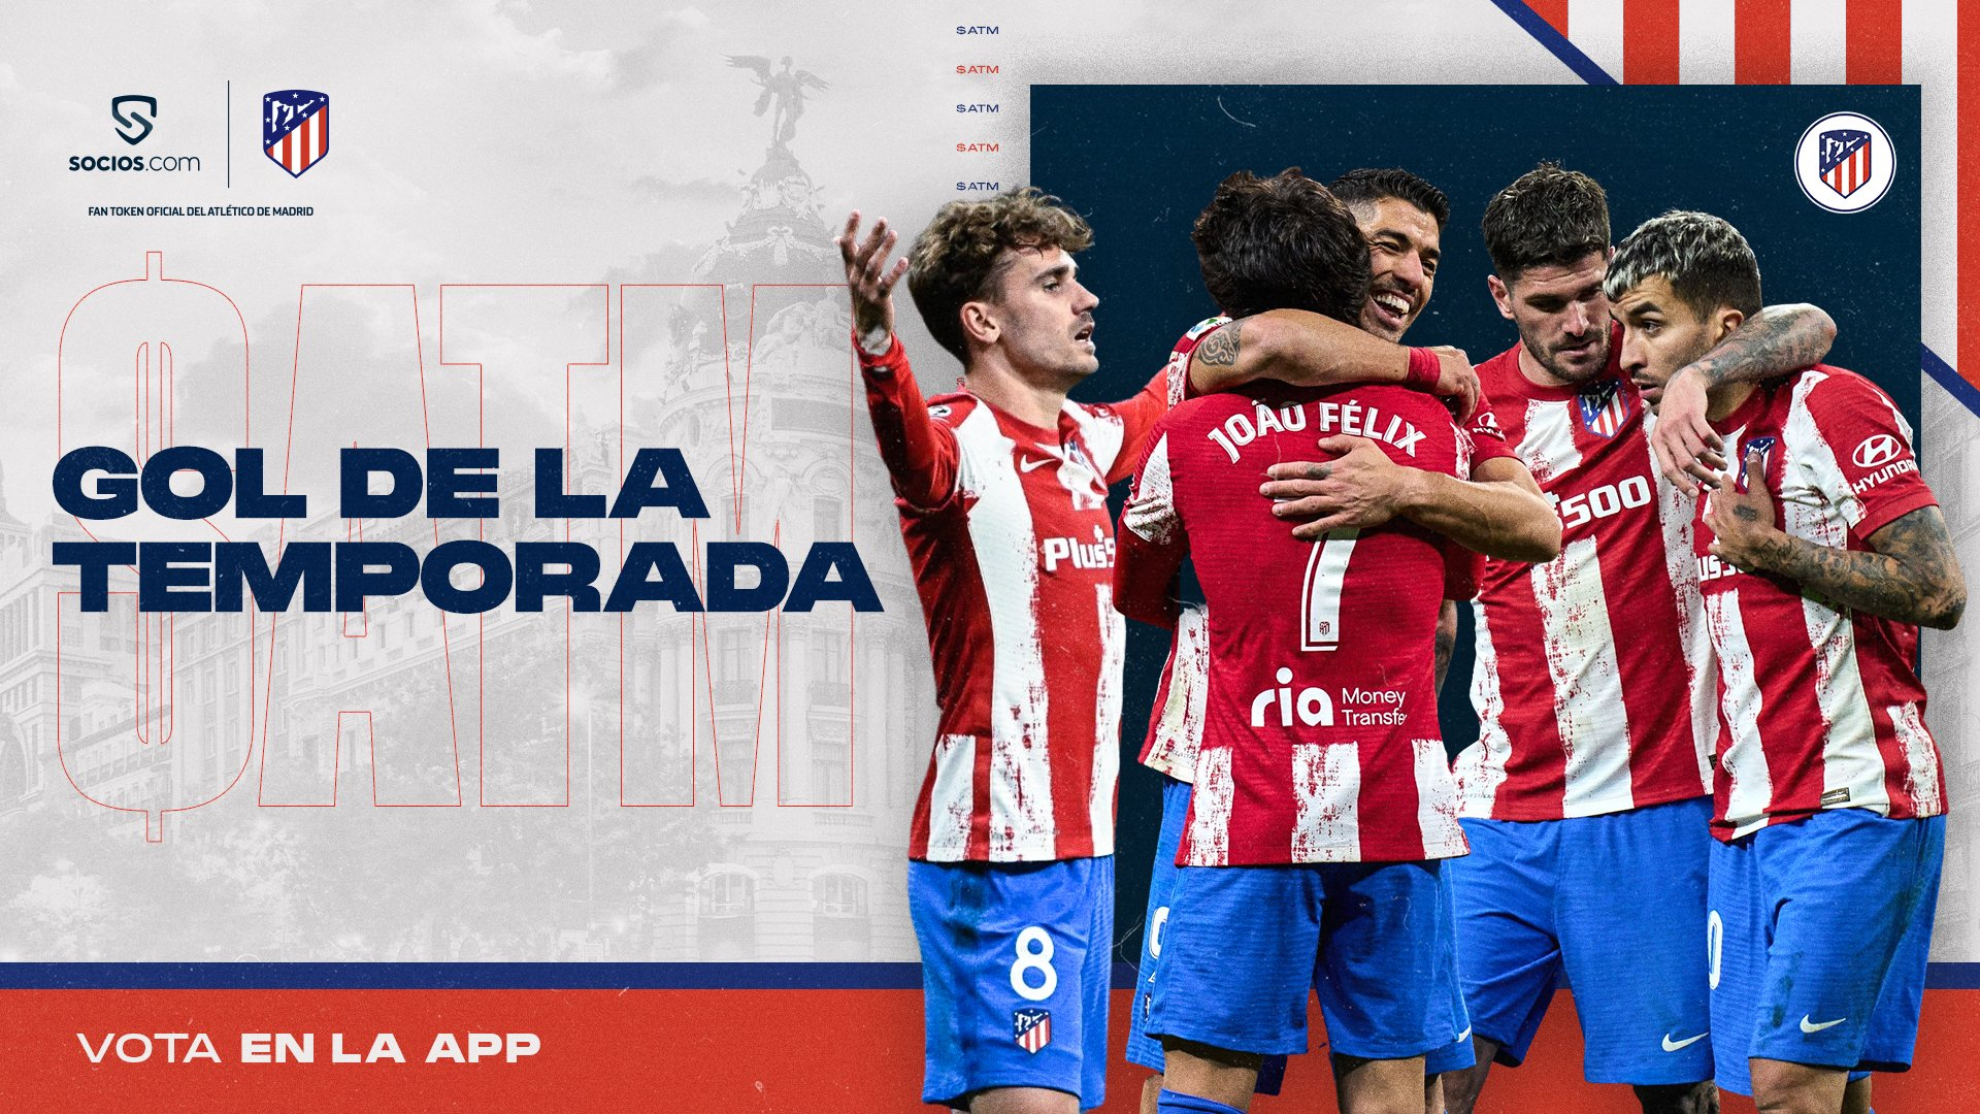 Atletico Madrid and Socios.com search for the best goal of the season